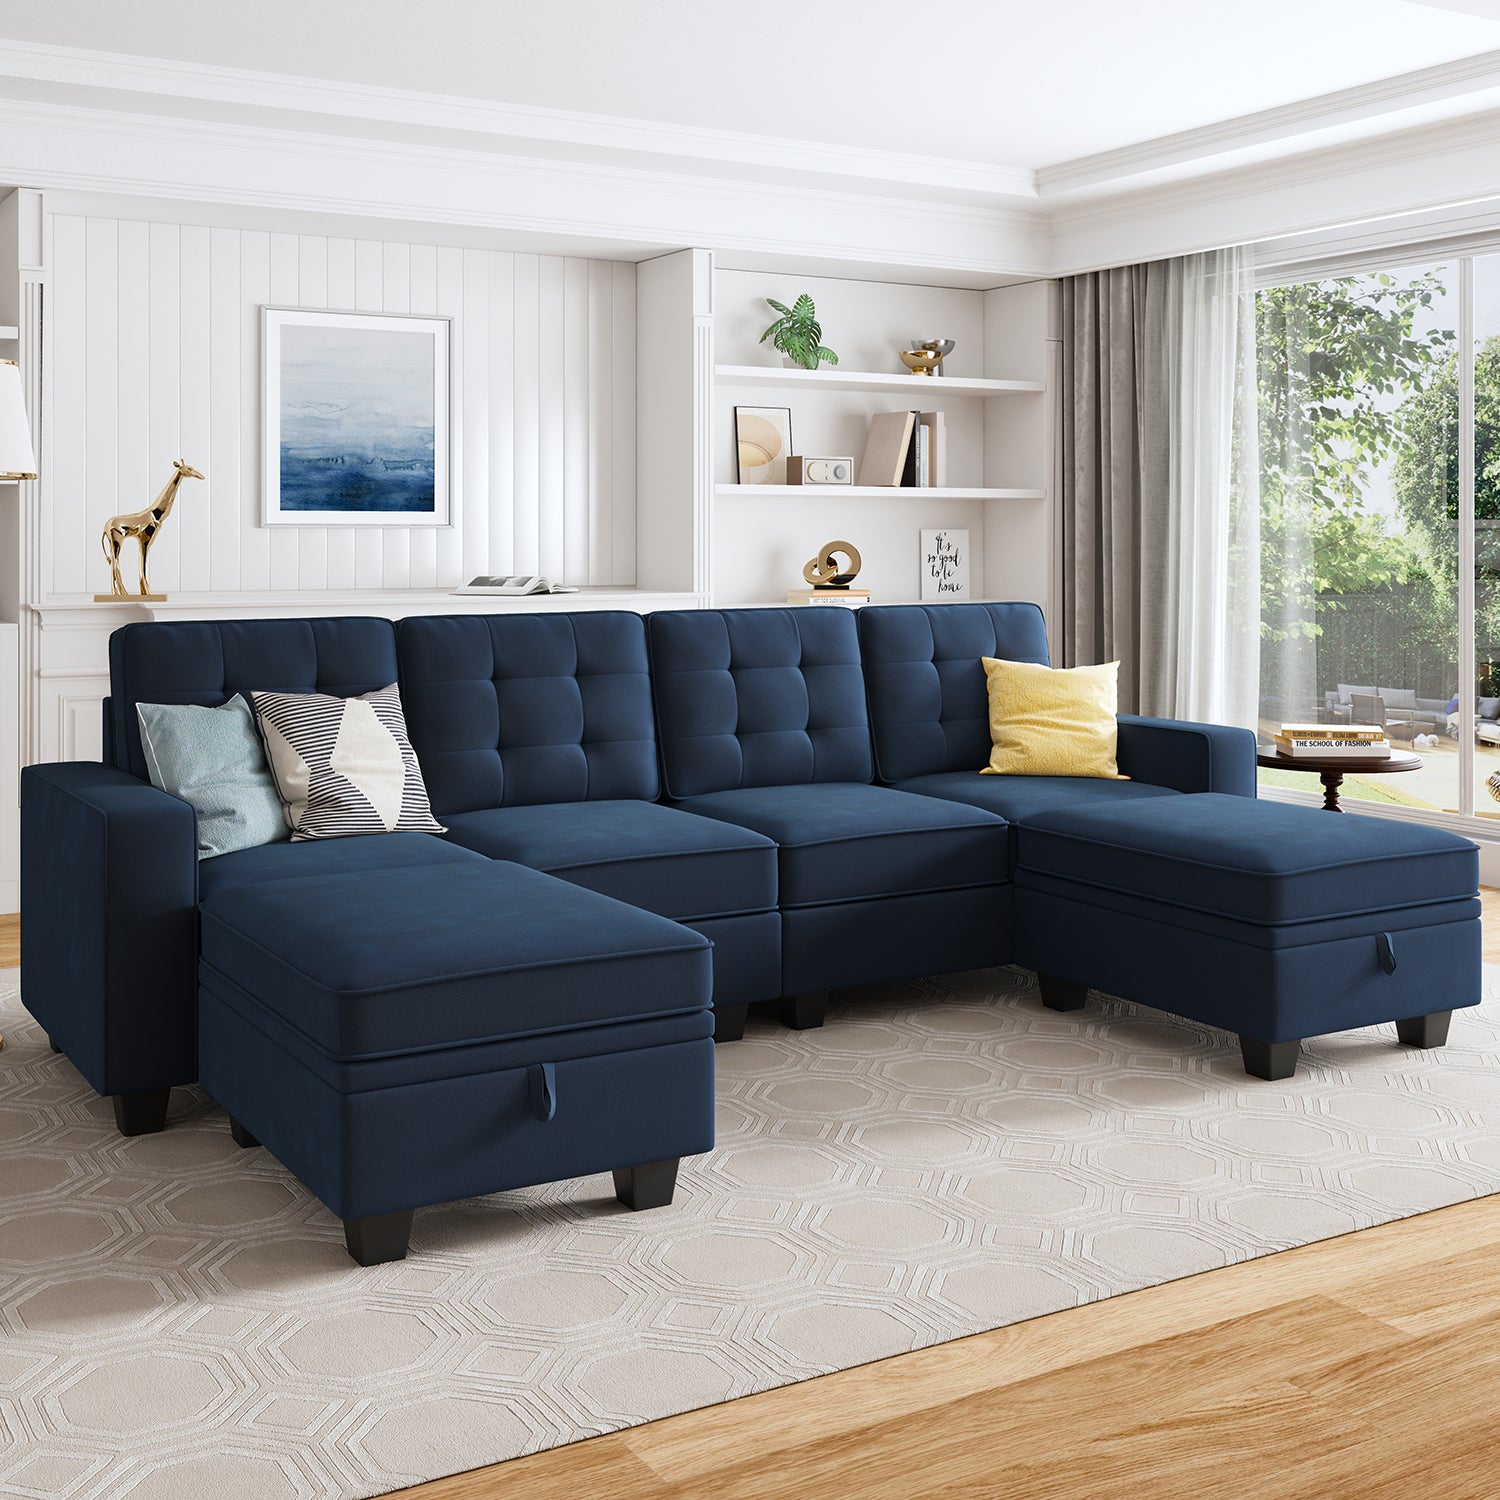 HONBAY Velvet 4-Seat Sectional Sofa Couch with Optional Extra Stoage Chaise&Ottoman